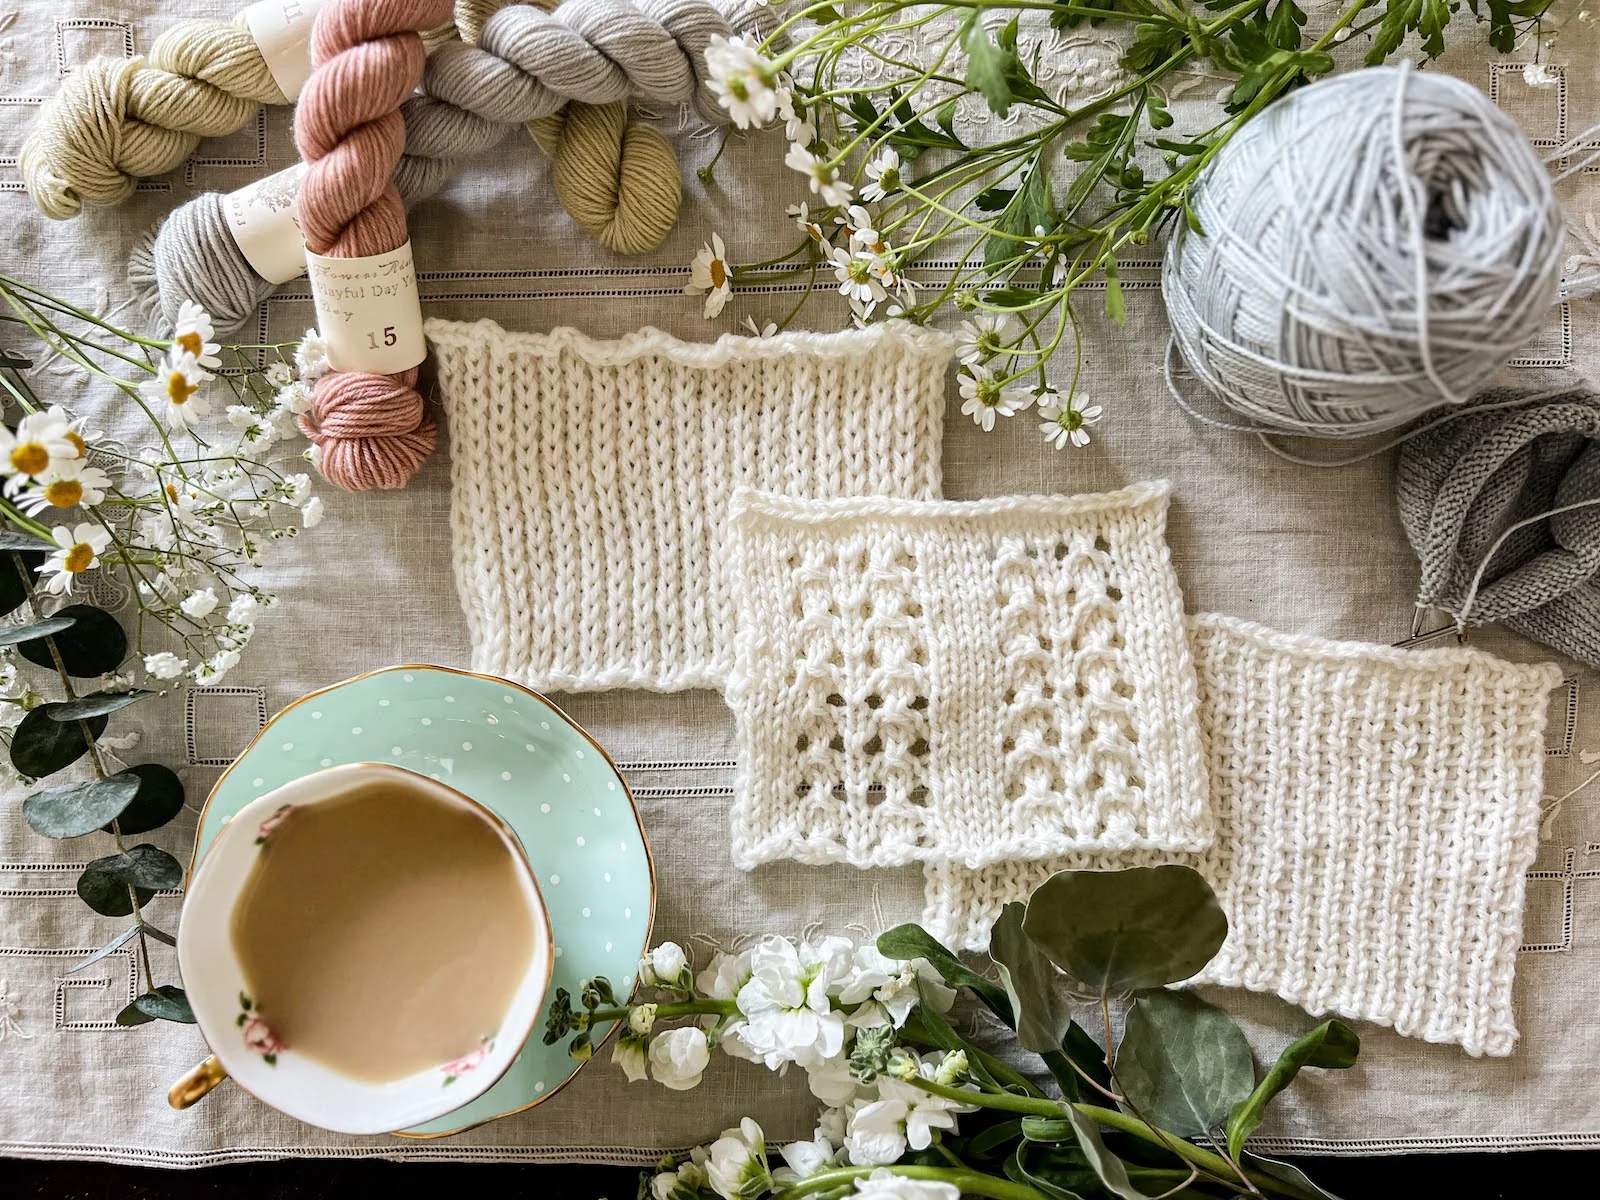 Three swatches of white knit fabric showing different slipped stitches are laid out in a diagonal on a cream linen background. They're surrounded by pastel yarn, fresh flowers, and a teacup full of milky tea.